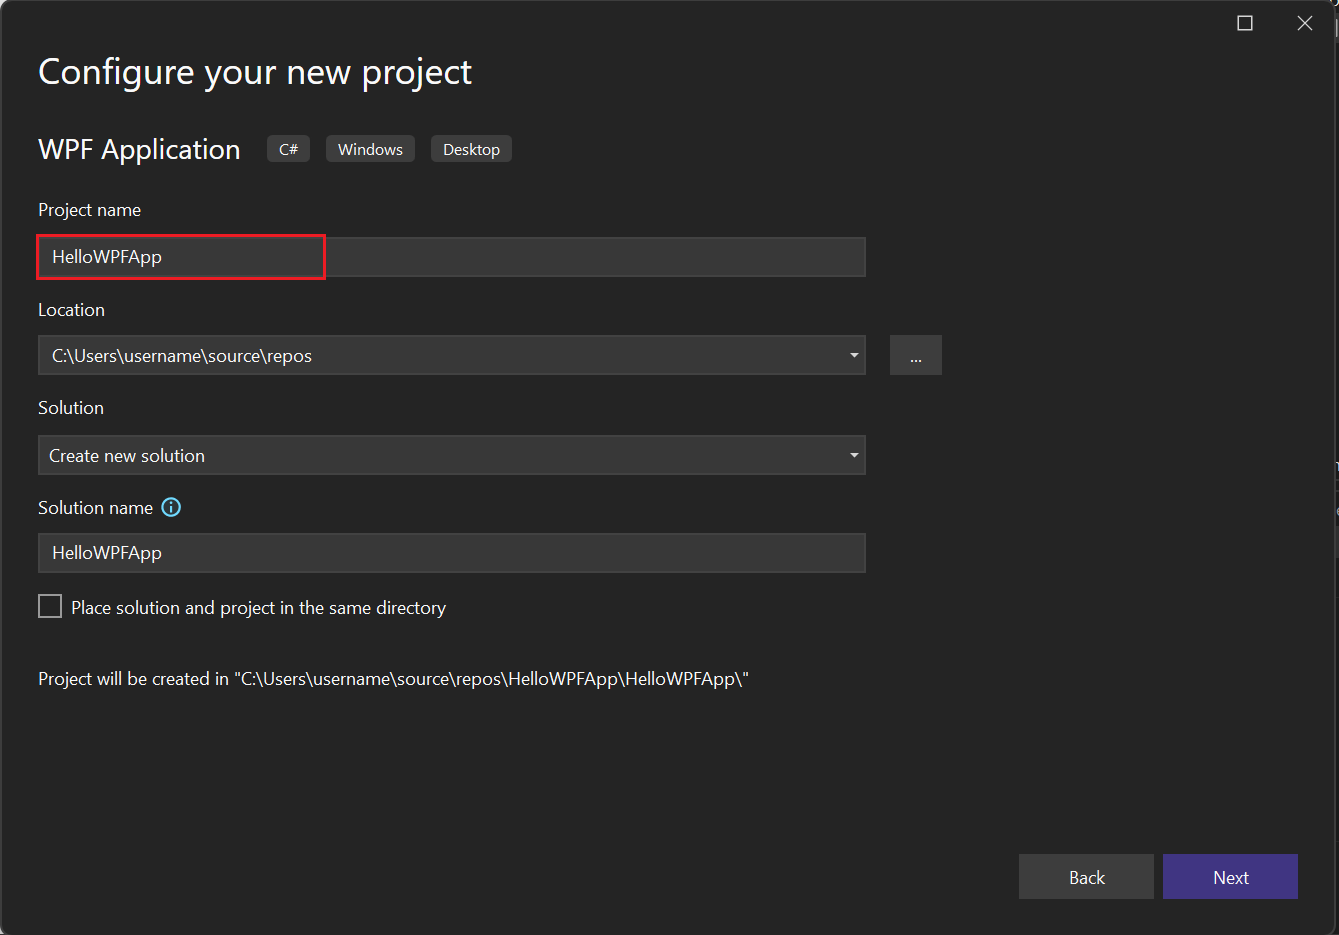 Screenshot that shows the 'Configure your new project' dialog in Visual Studio with 'HelloWPFApp' entered in the Project name field.